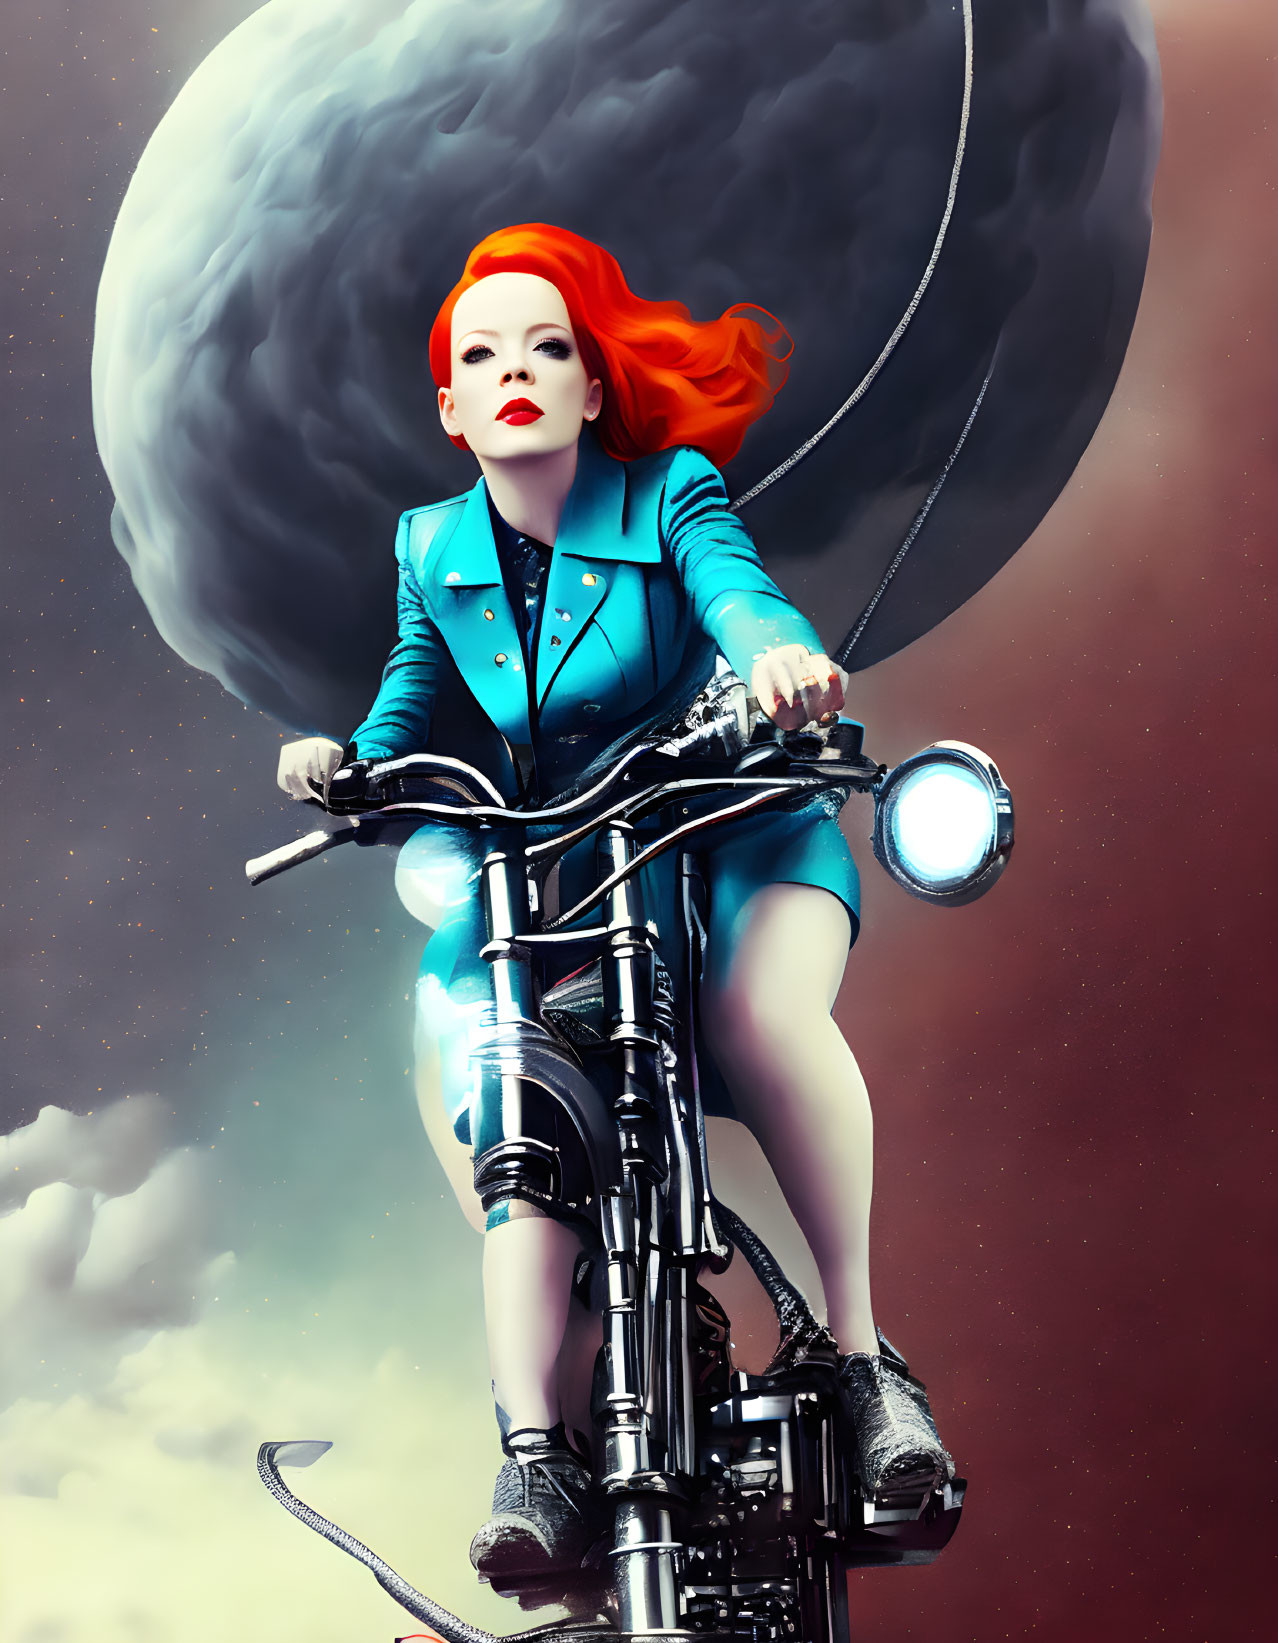 Fiery-haired woman on ornate motorcycle under oversized moon